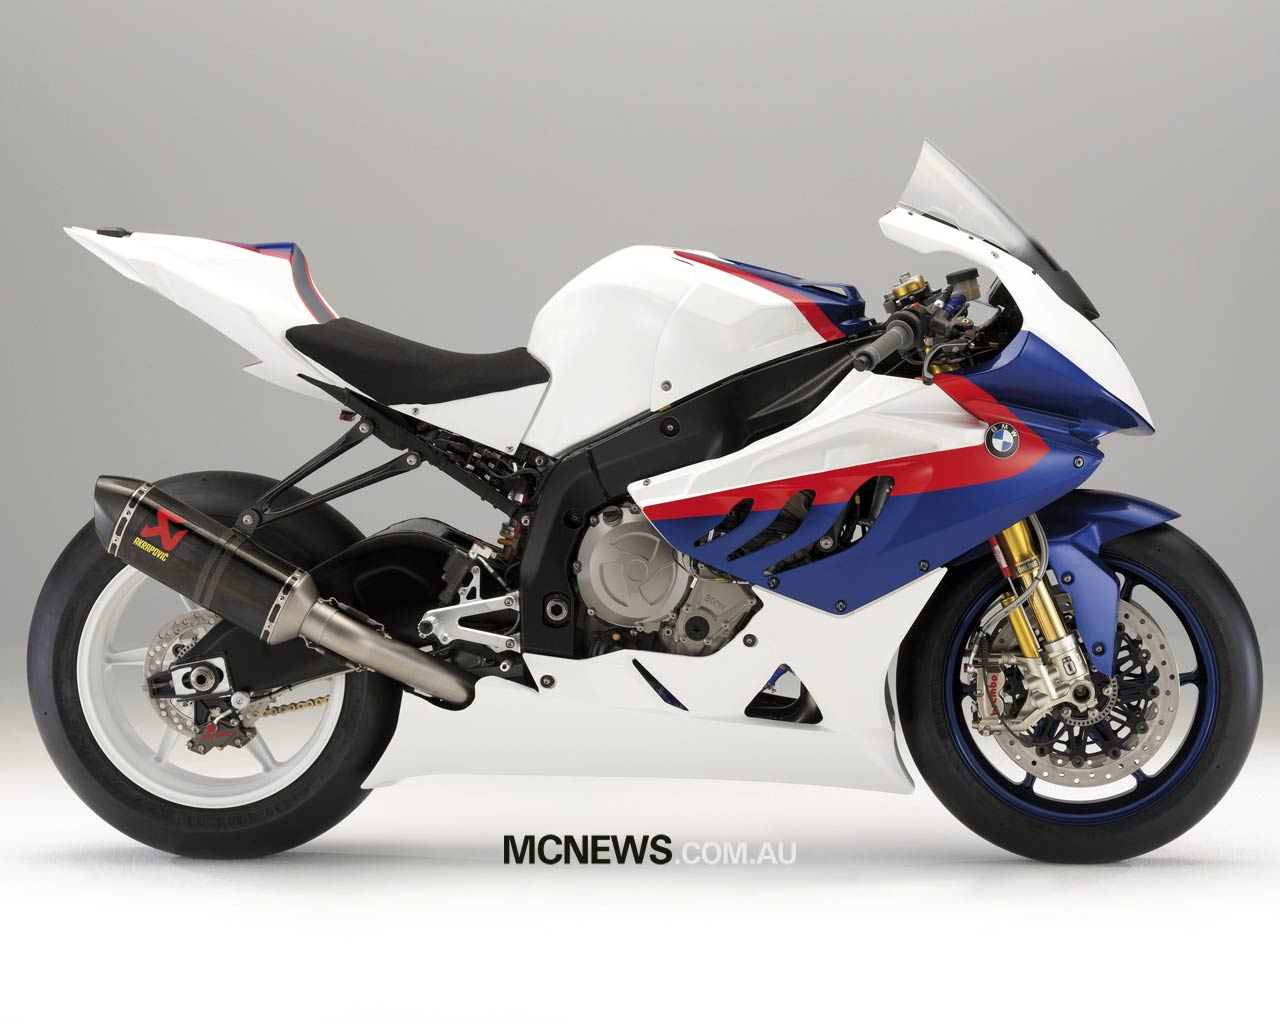 Bike Pics And Wallpapers - Bmw S1000rr Price In Canada - HD Wallpaper 